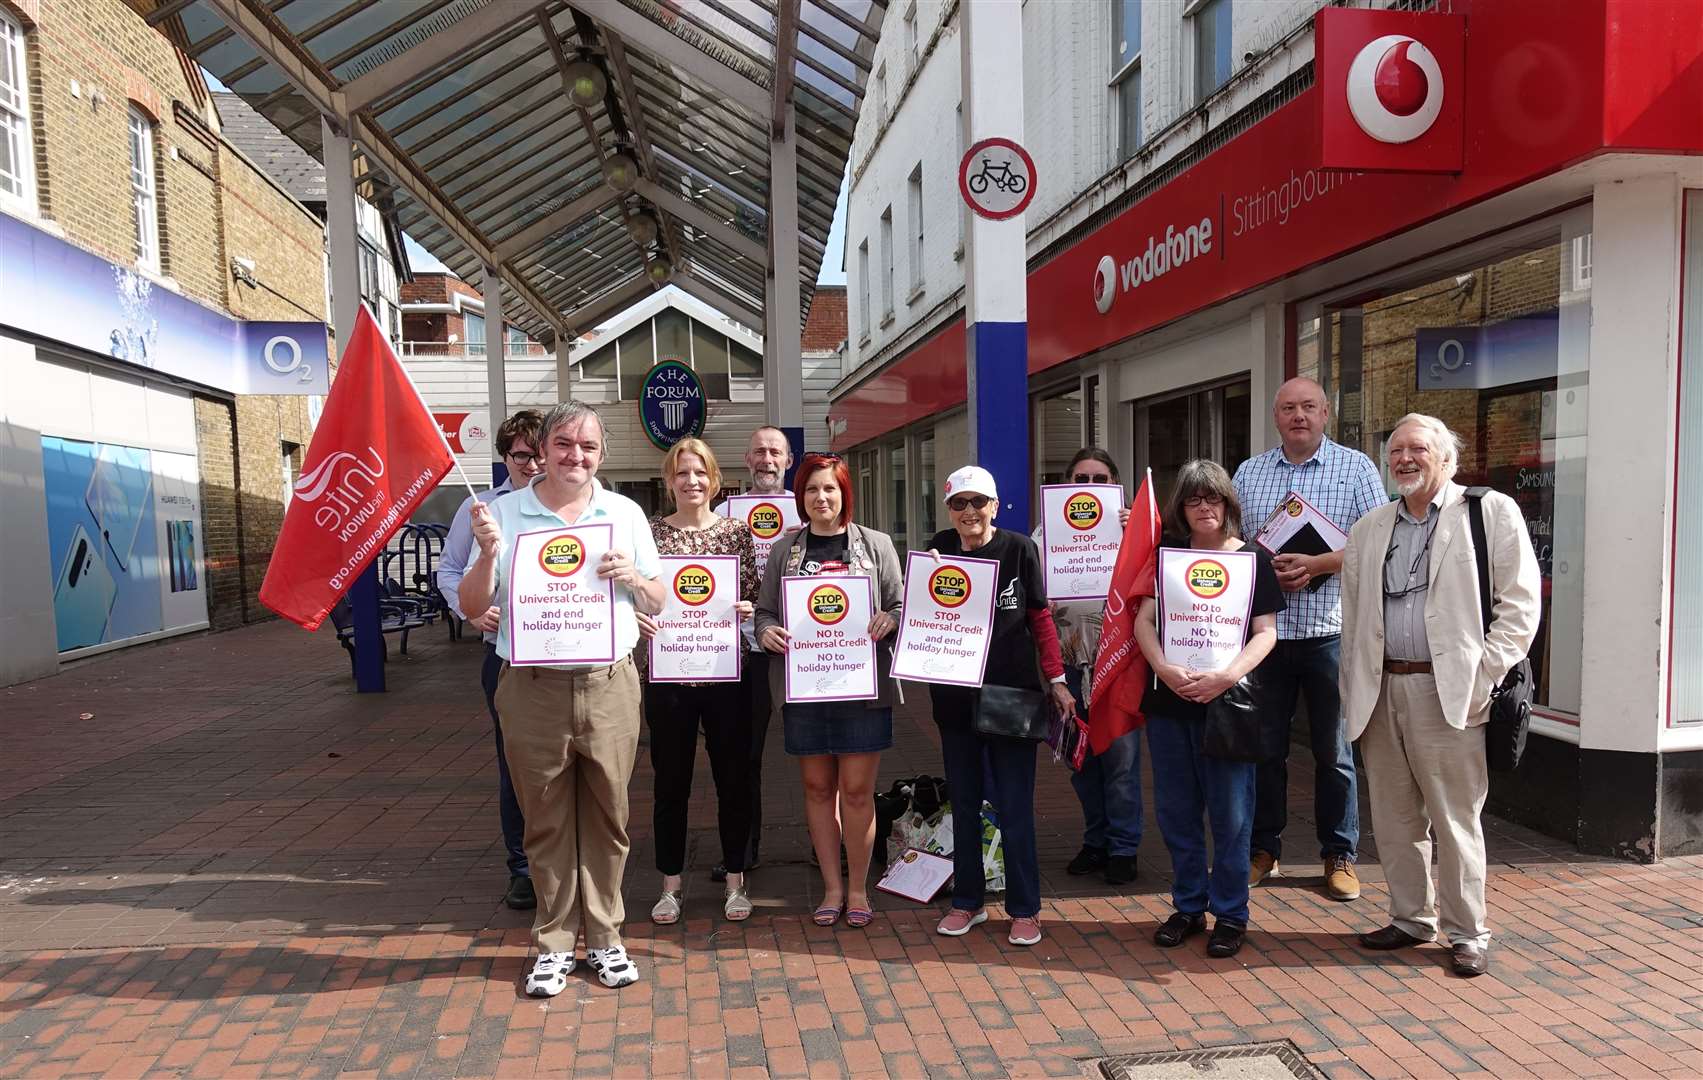 Unite Community members protest about Universal Credit outside the Forum shopping centre in Sittingbourne